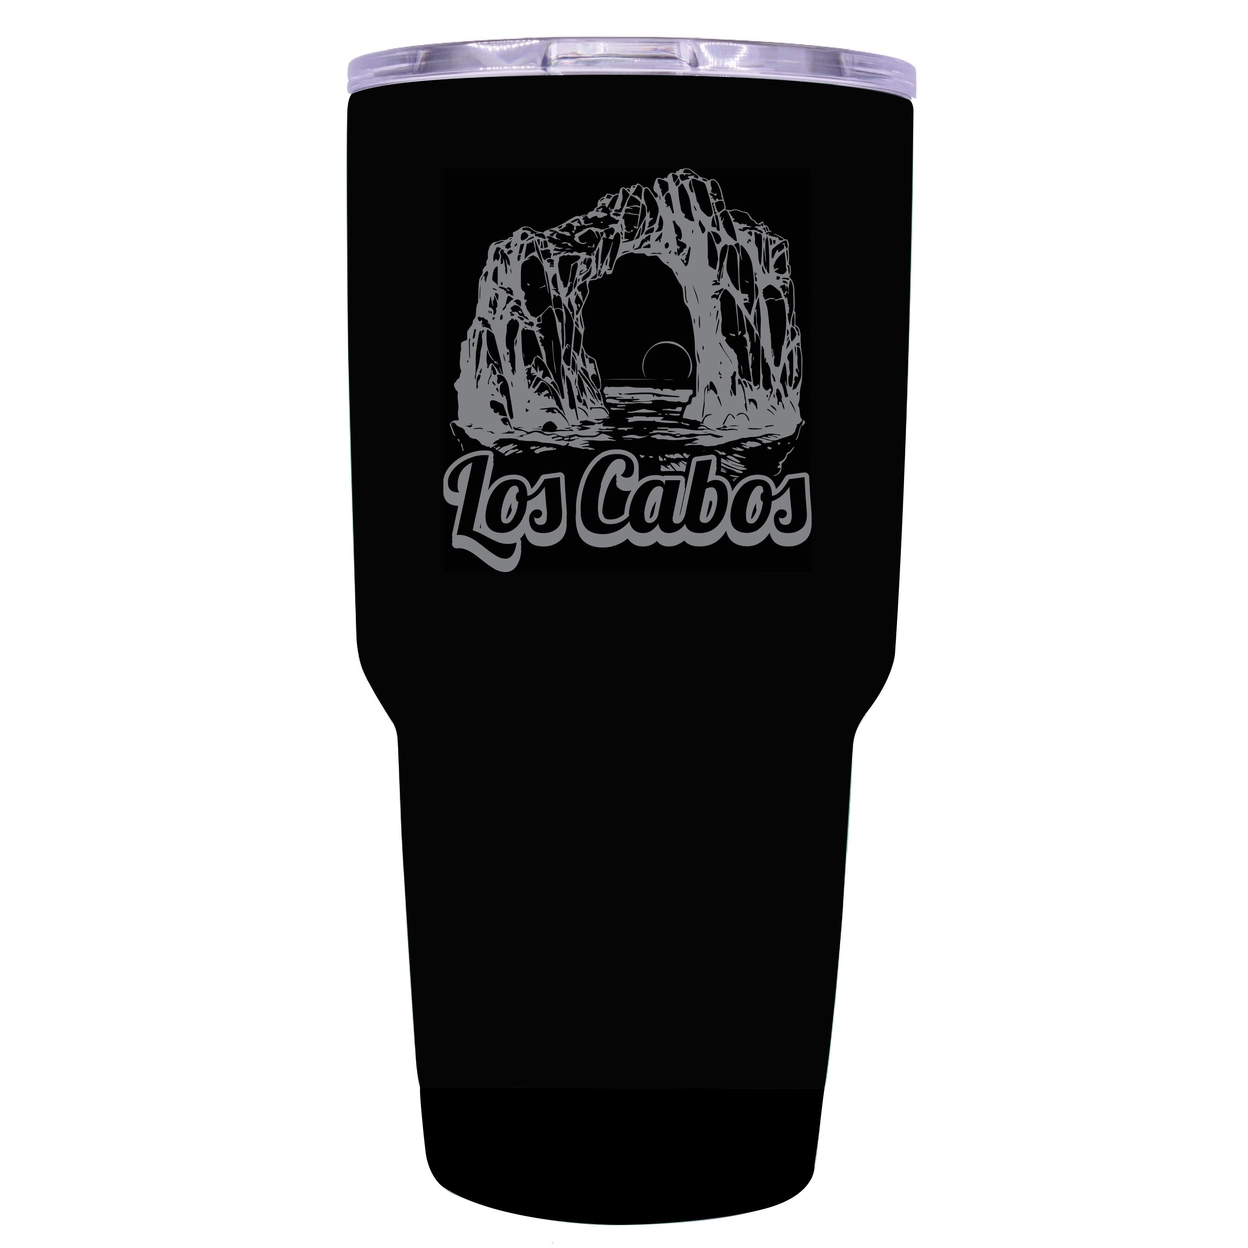 Los Cabos Mexico Souvenir 24 Oz Engraved Insulated Stainless Steel Tumbler - Black,,4-Pack